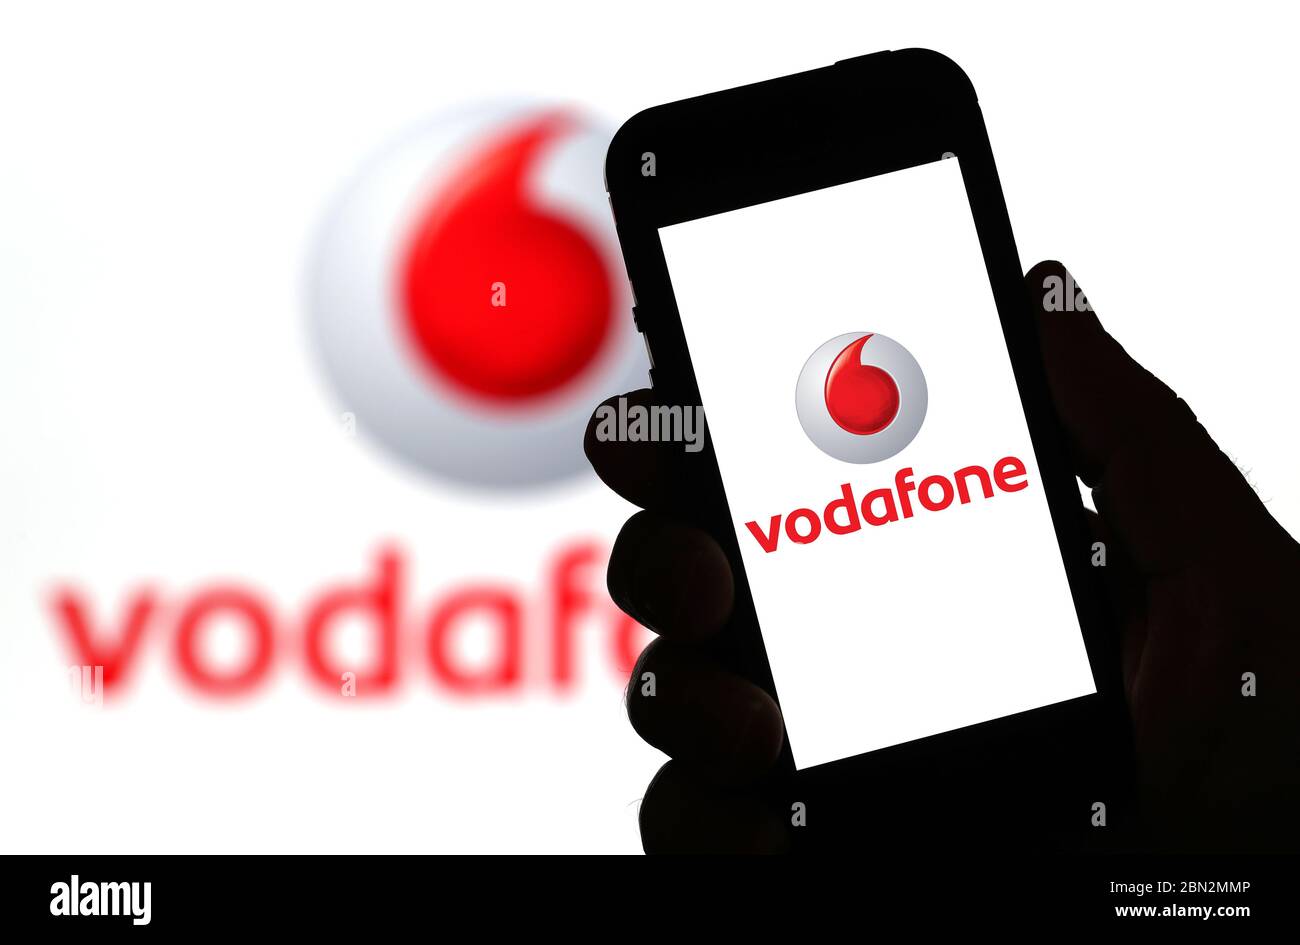 Vodafone mobile phone network logo on a mobile phone (Editorial use only) Stock Photo